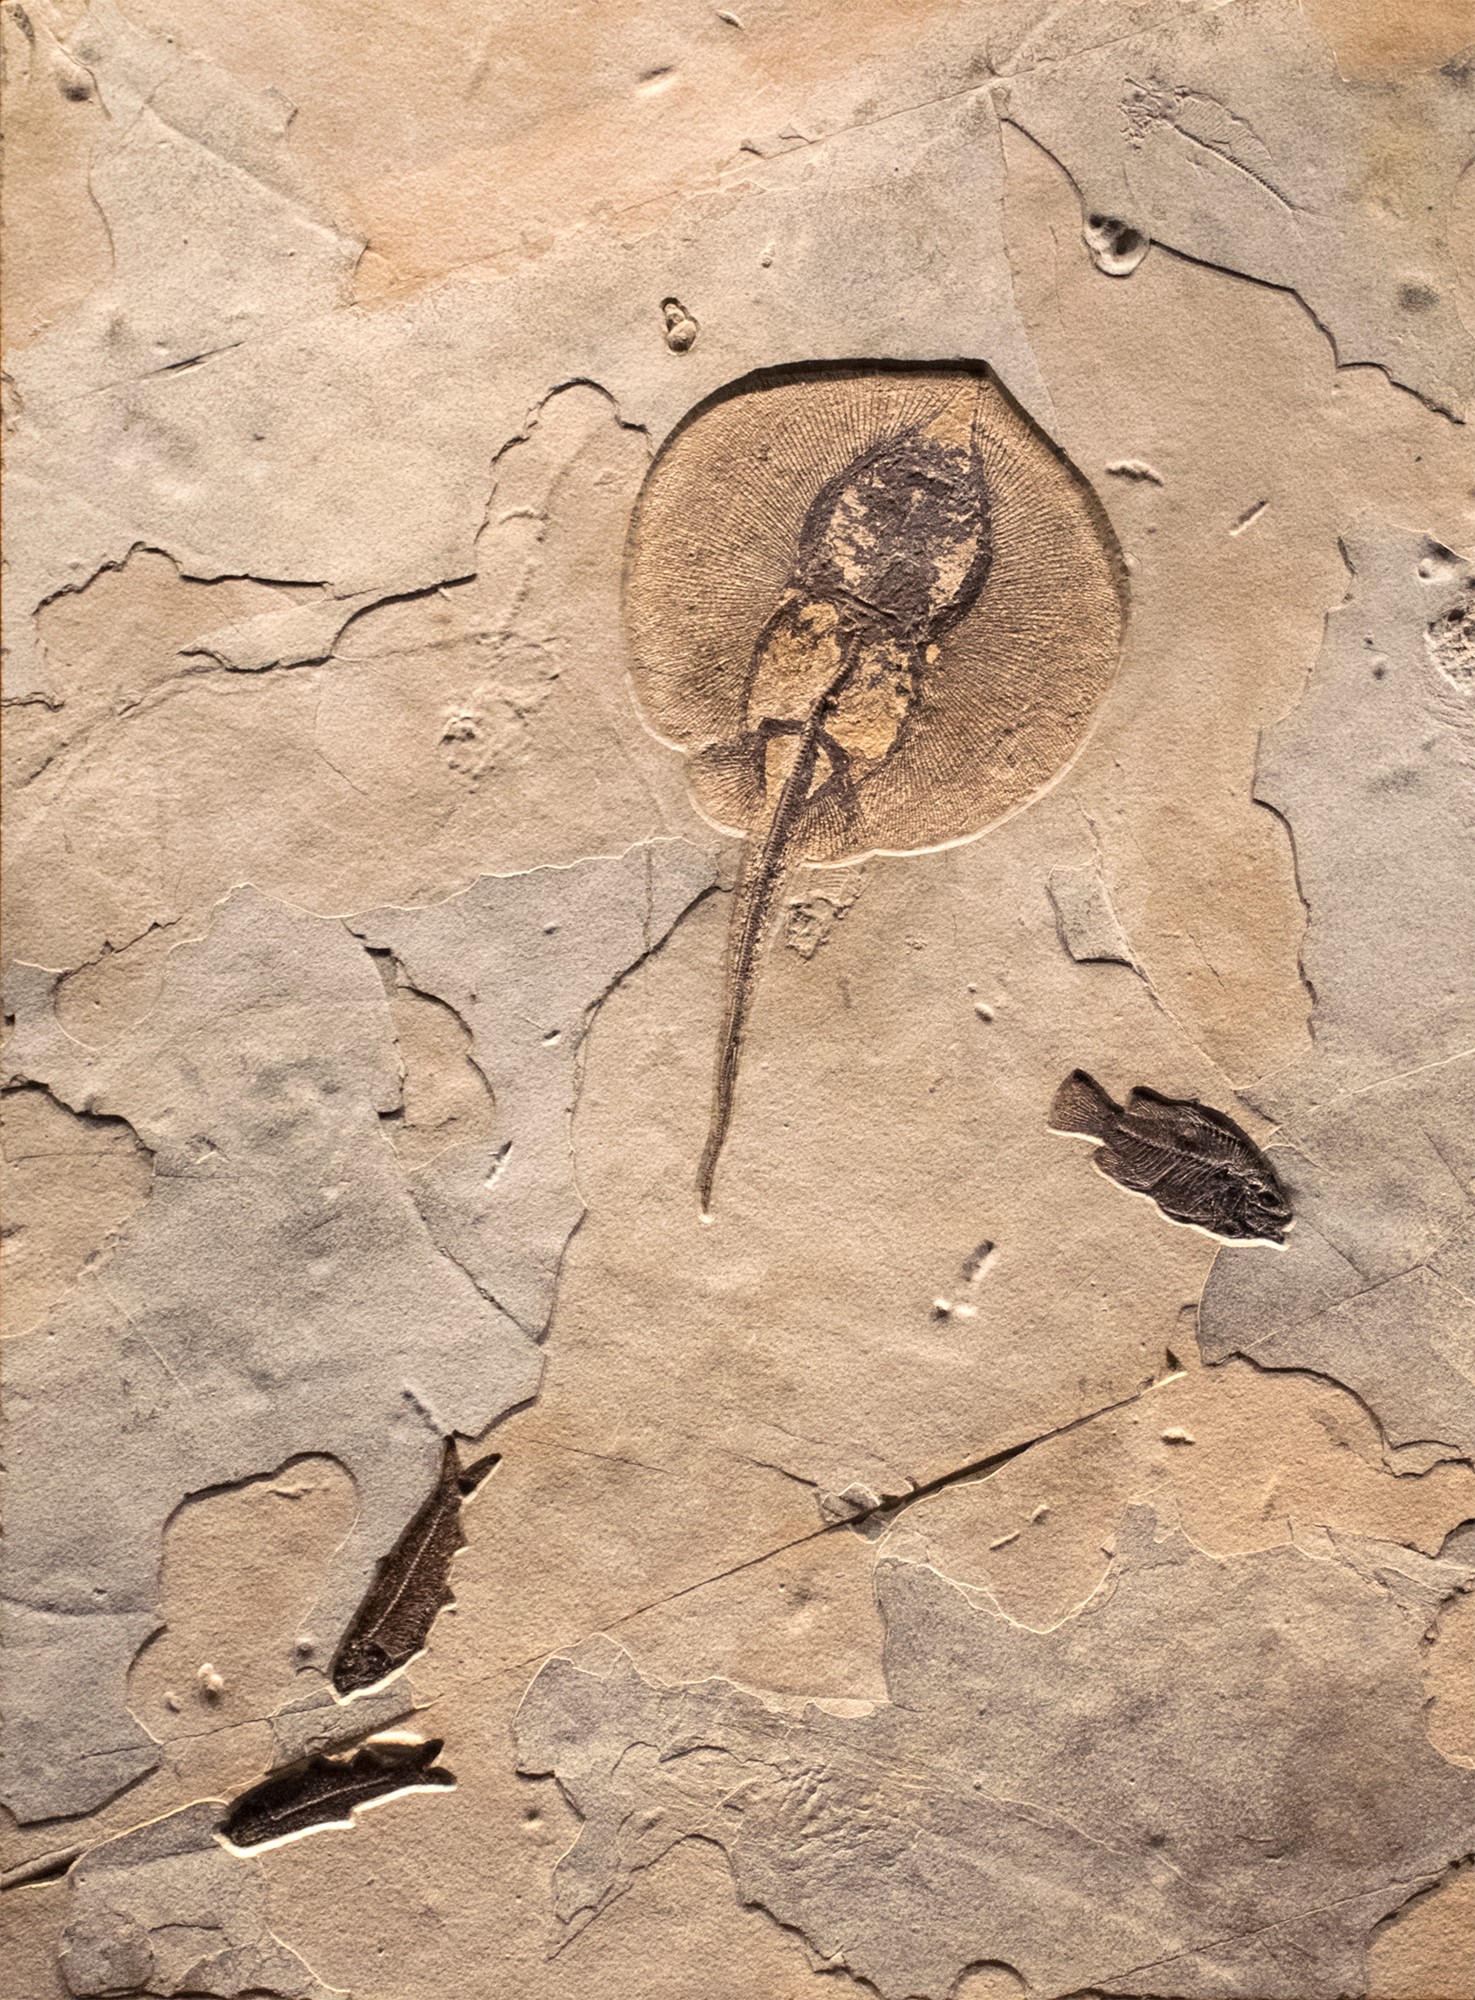 Fossil Collector Mural 02_MS170918500AM